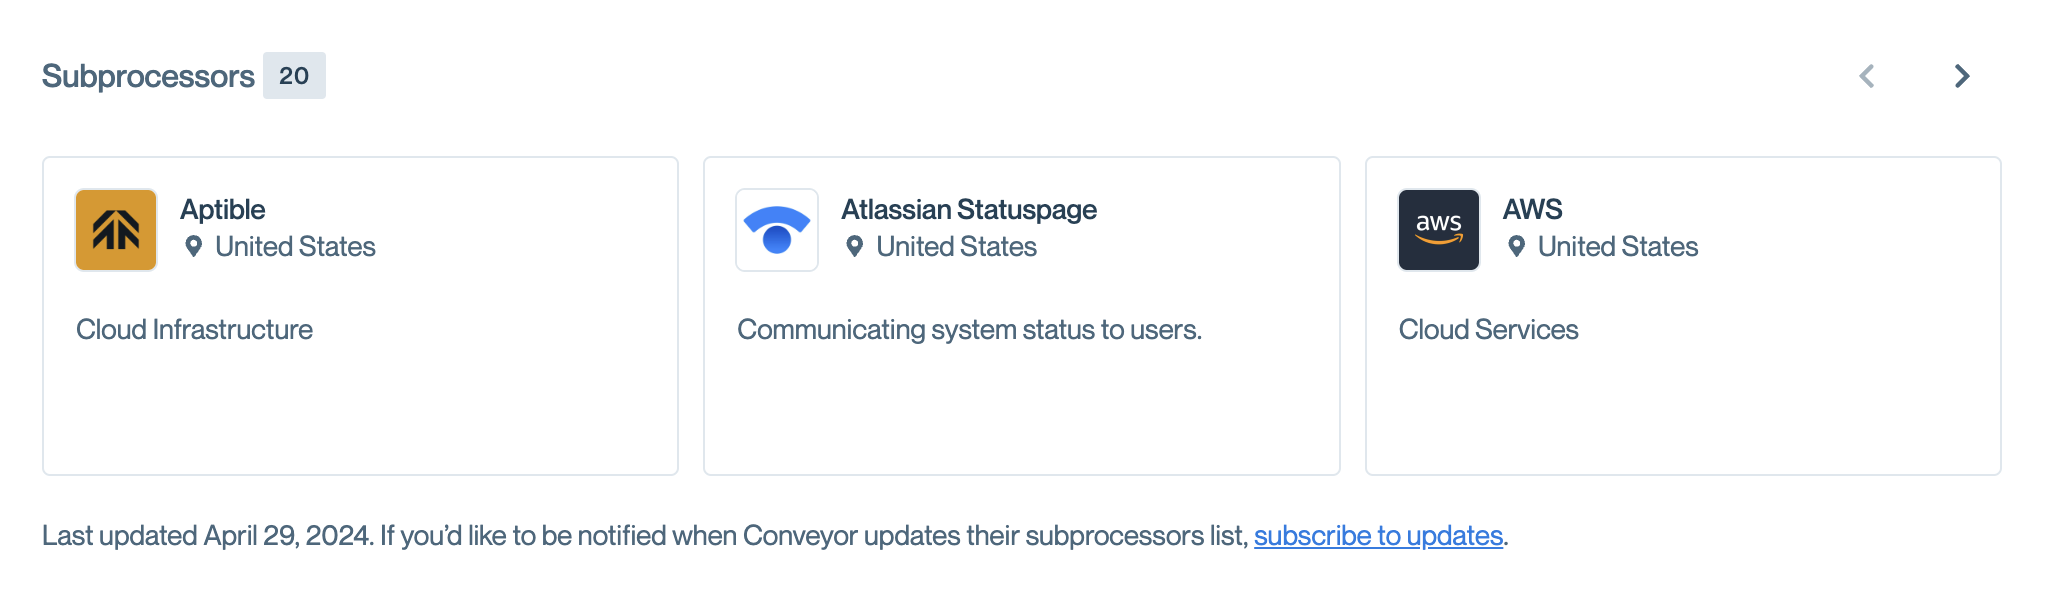 Example of a subprocessor list on Conveyor's own Trust Center.